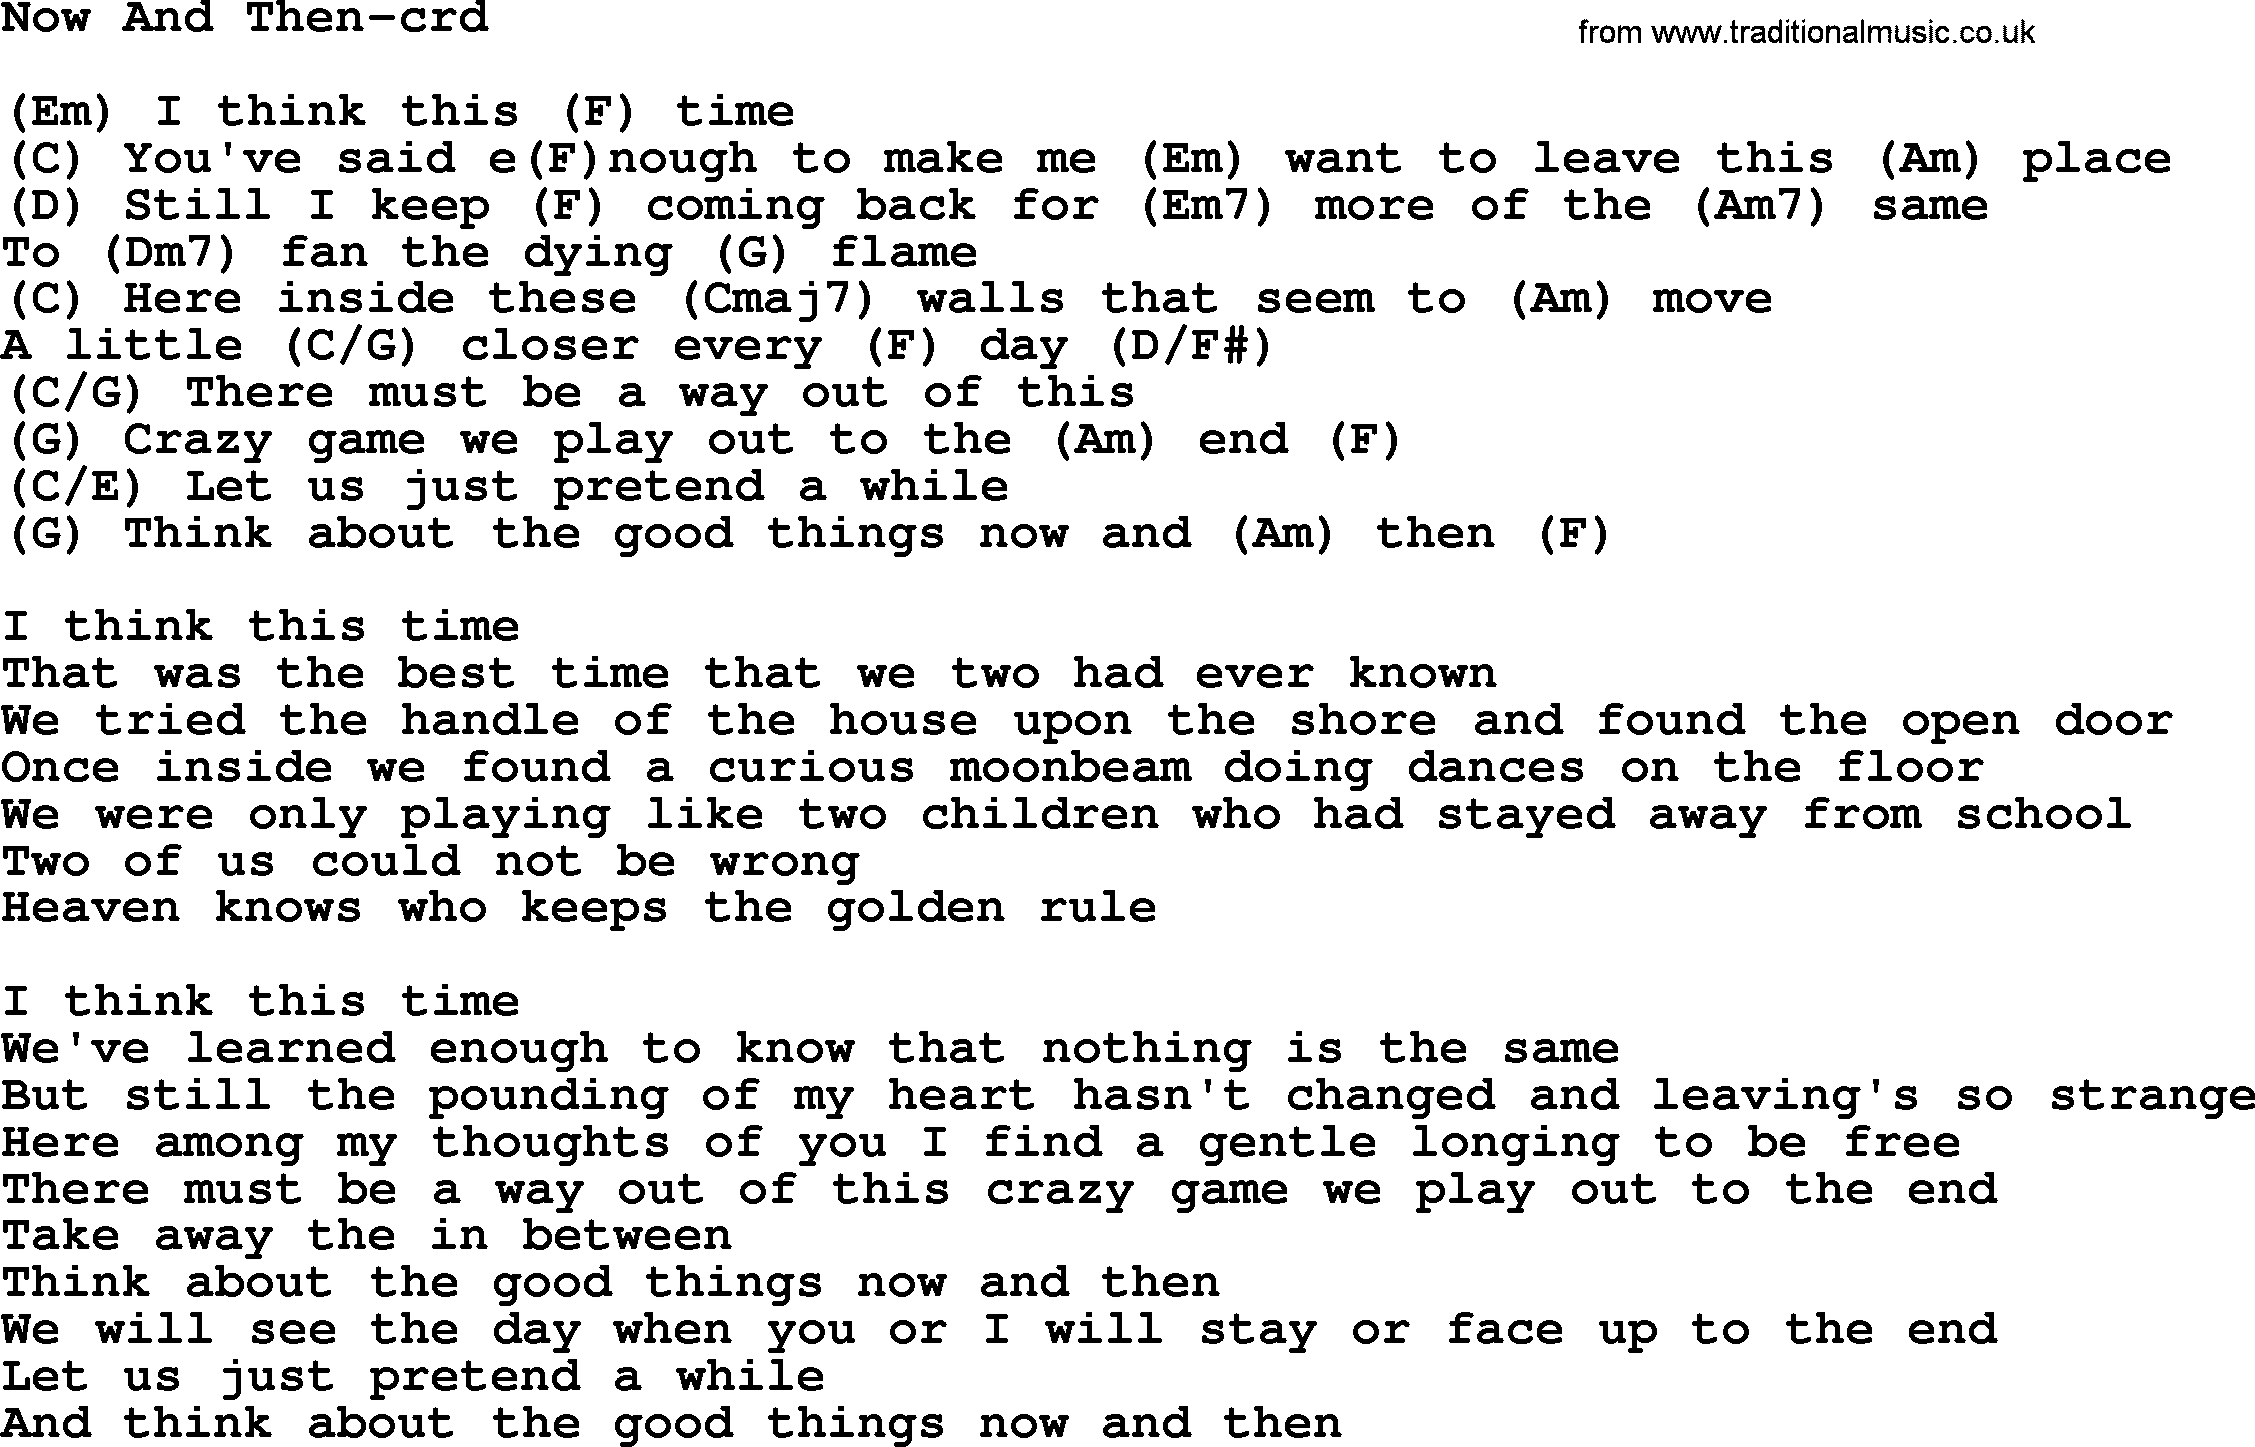 Gordon Lightfoot song Now And Then, lyrics and chords